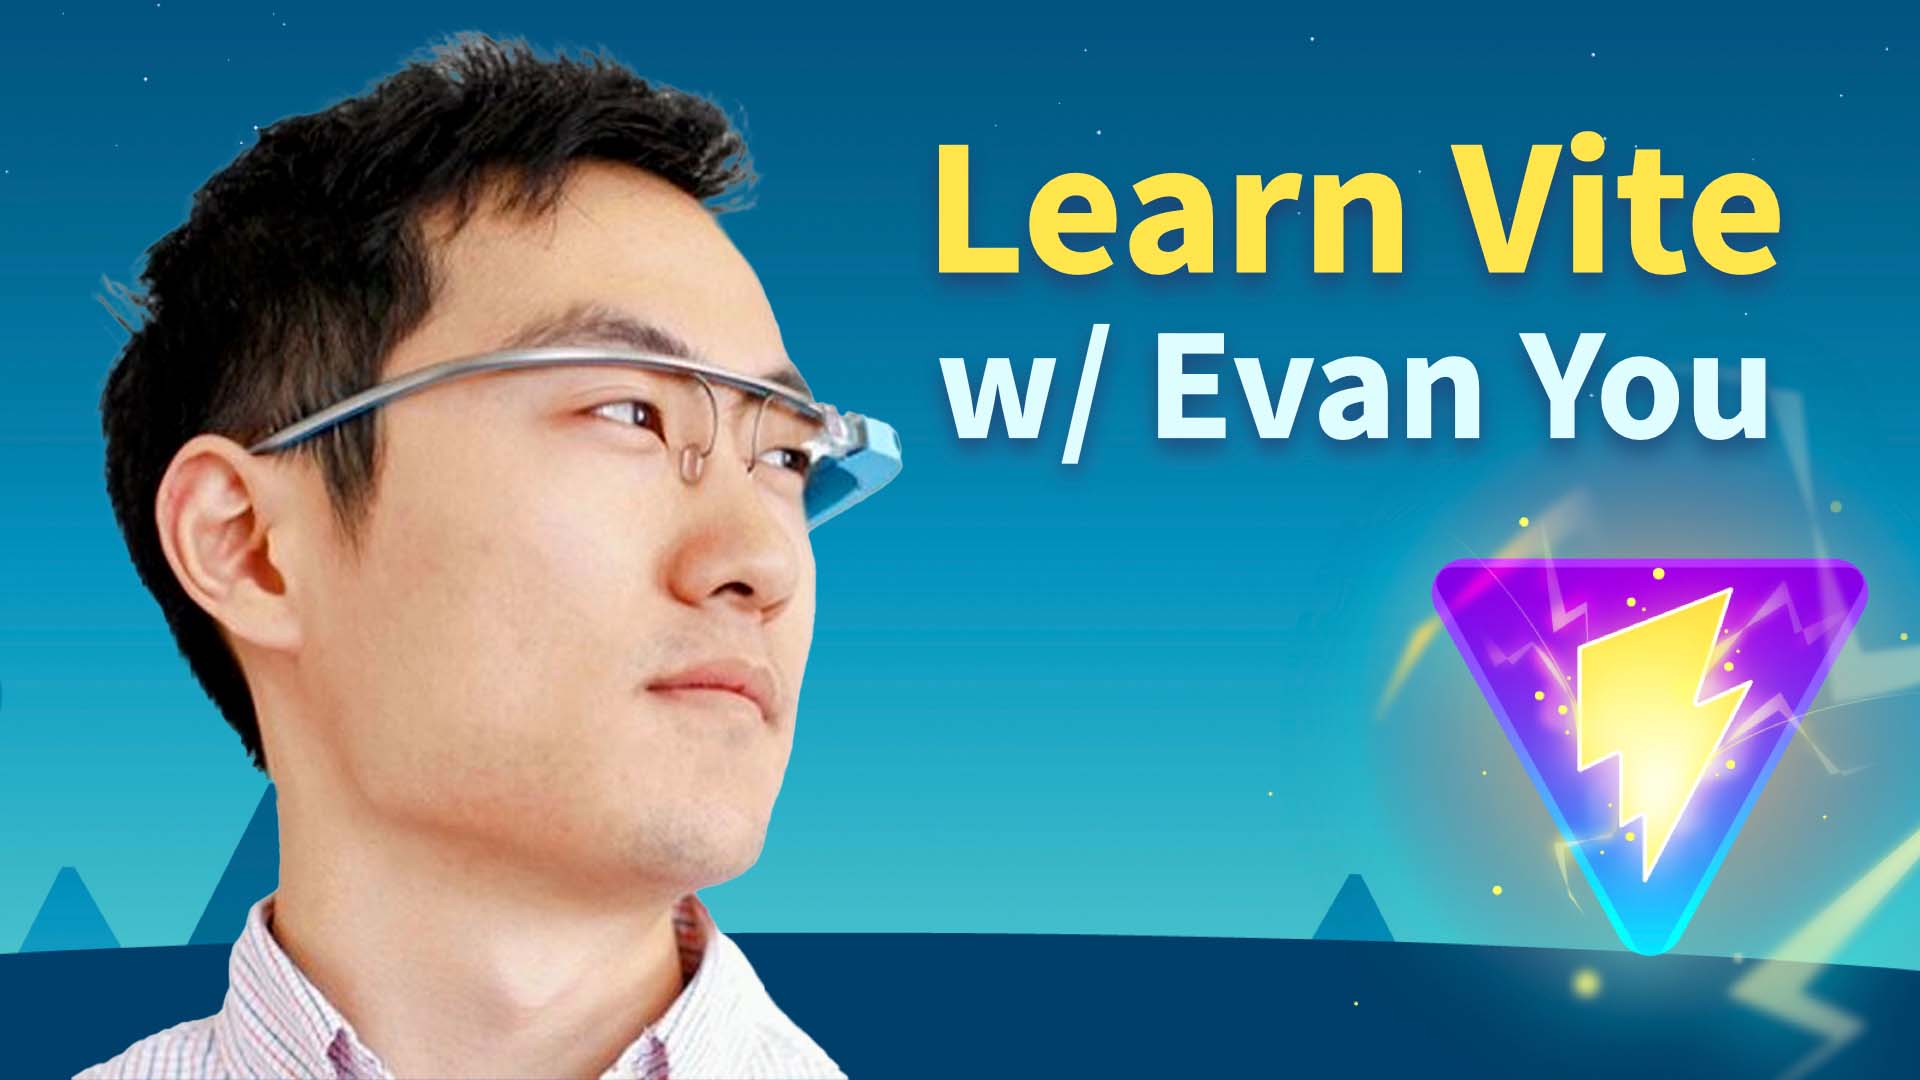 Learn Vite with Evan You